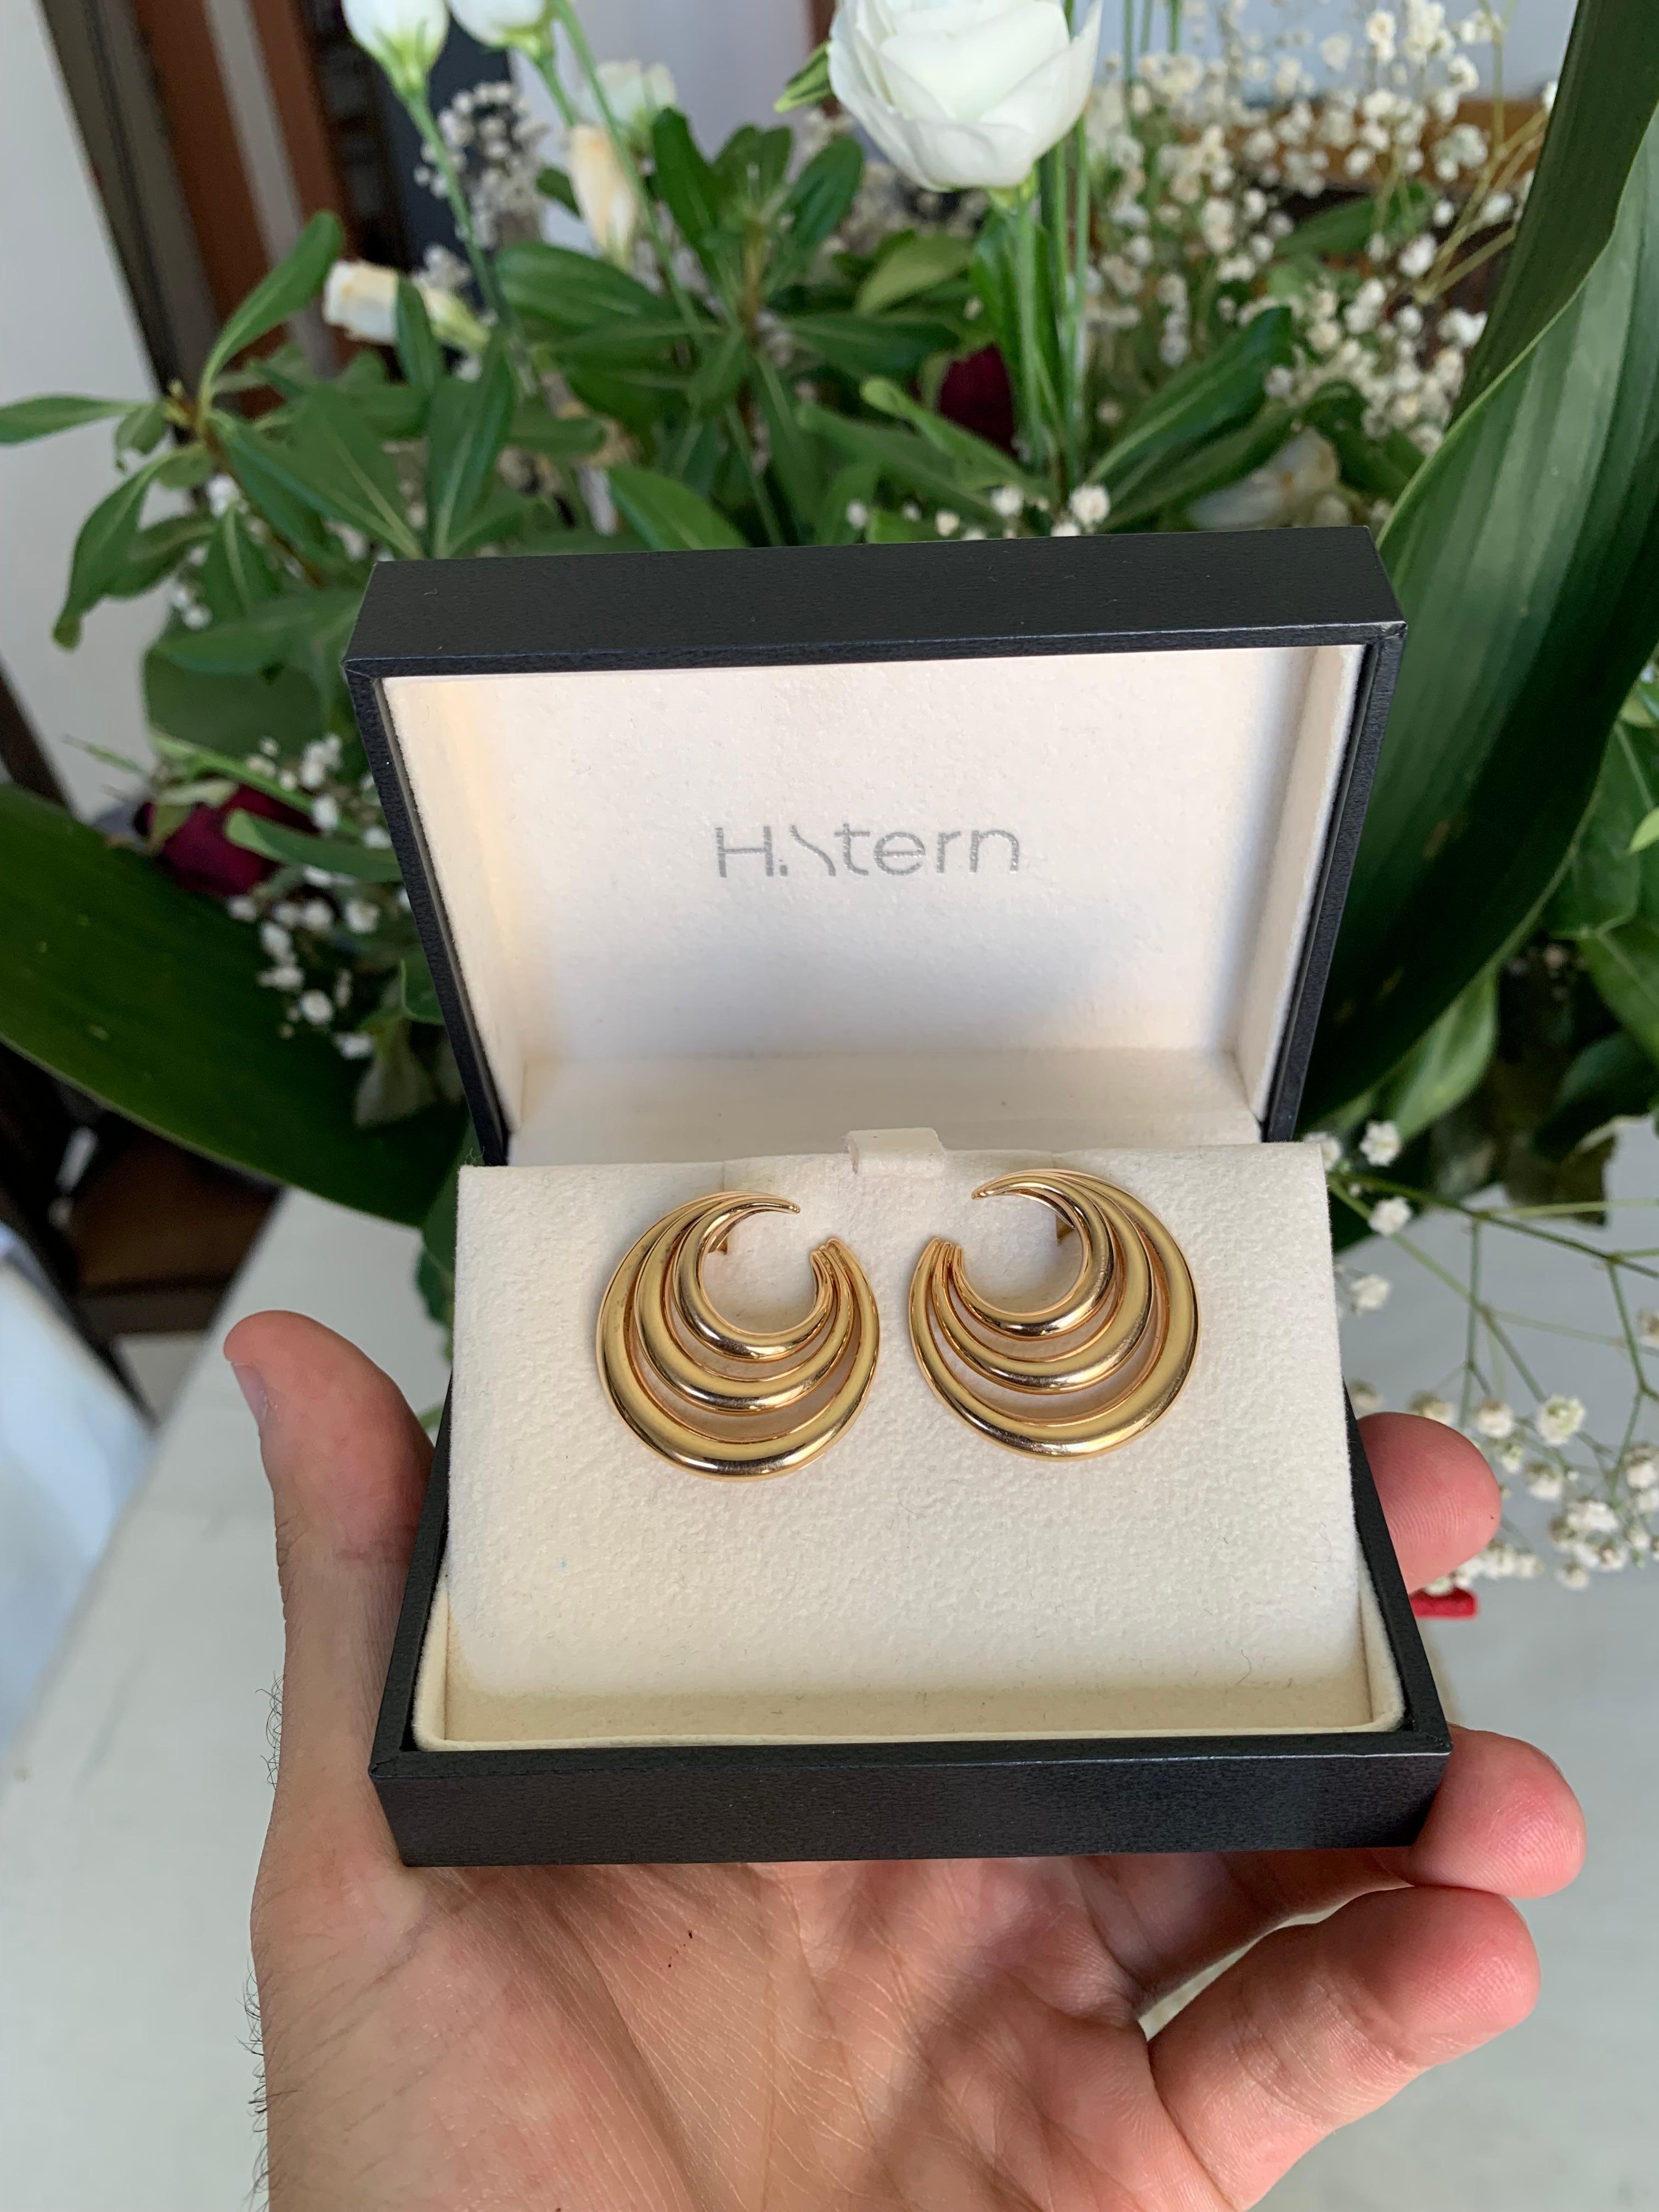 In Like New Condition.
Beautifully Hand Crafted 18k Rose Gold Earrings Made & Signed By “H.Stern”.
IRIS Collection.
Very Popular Model. 
Client Paid Almost $5,000 for them.
This is a Bargain.
They Have A Nice Weight To Them.
Very Well Made.
Comes